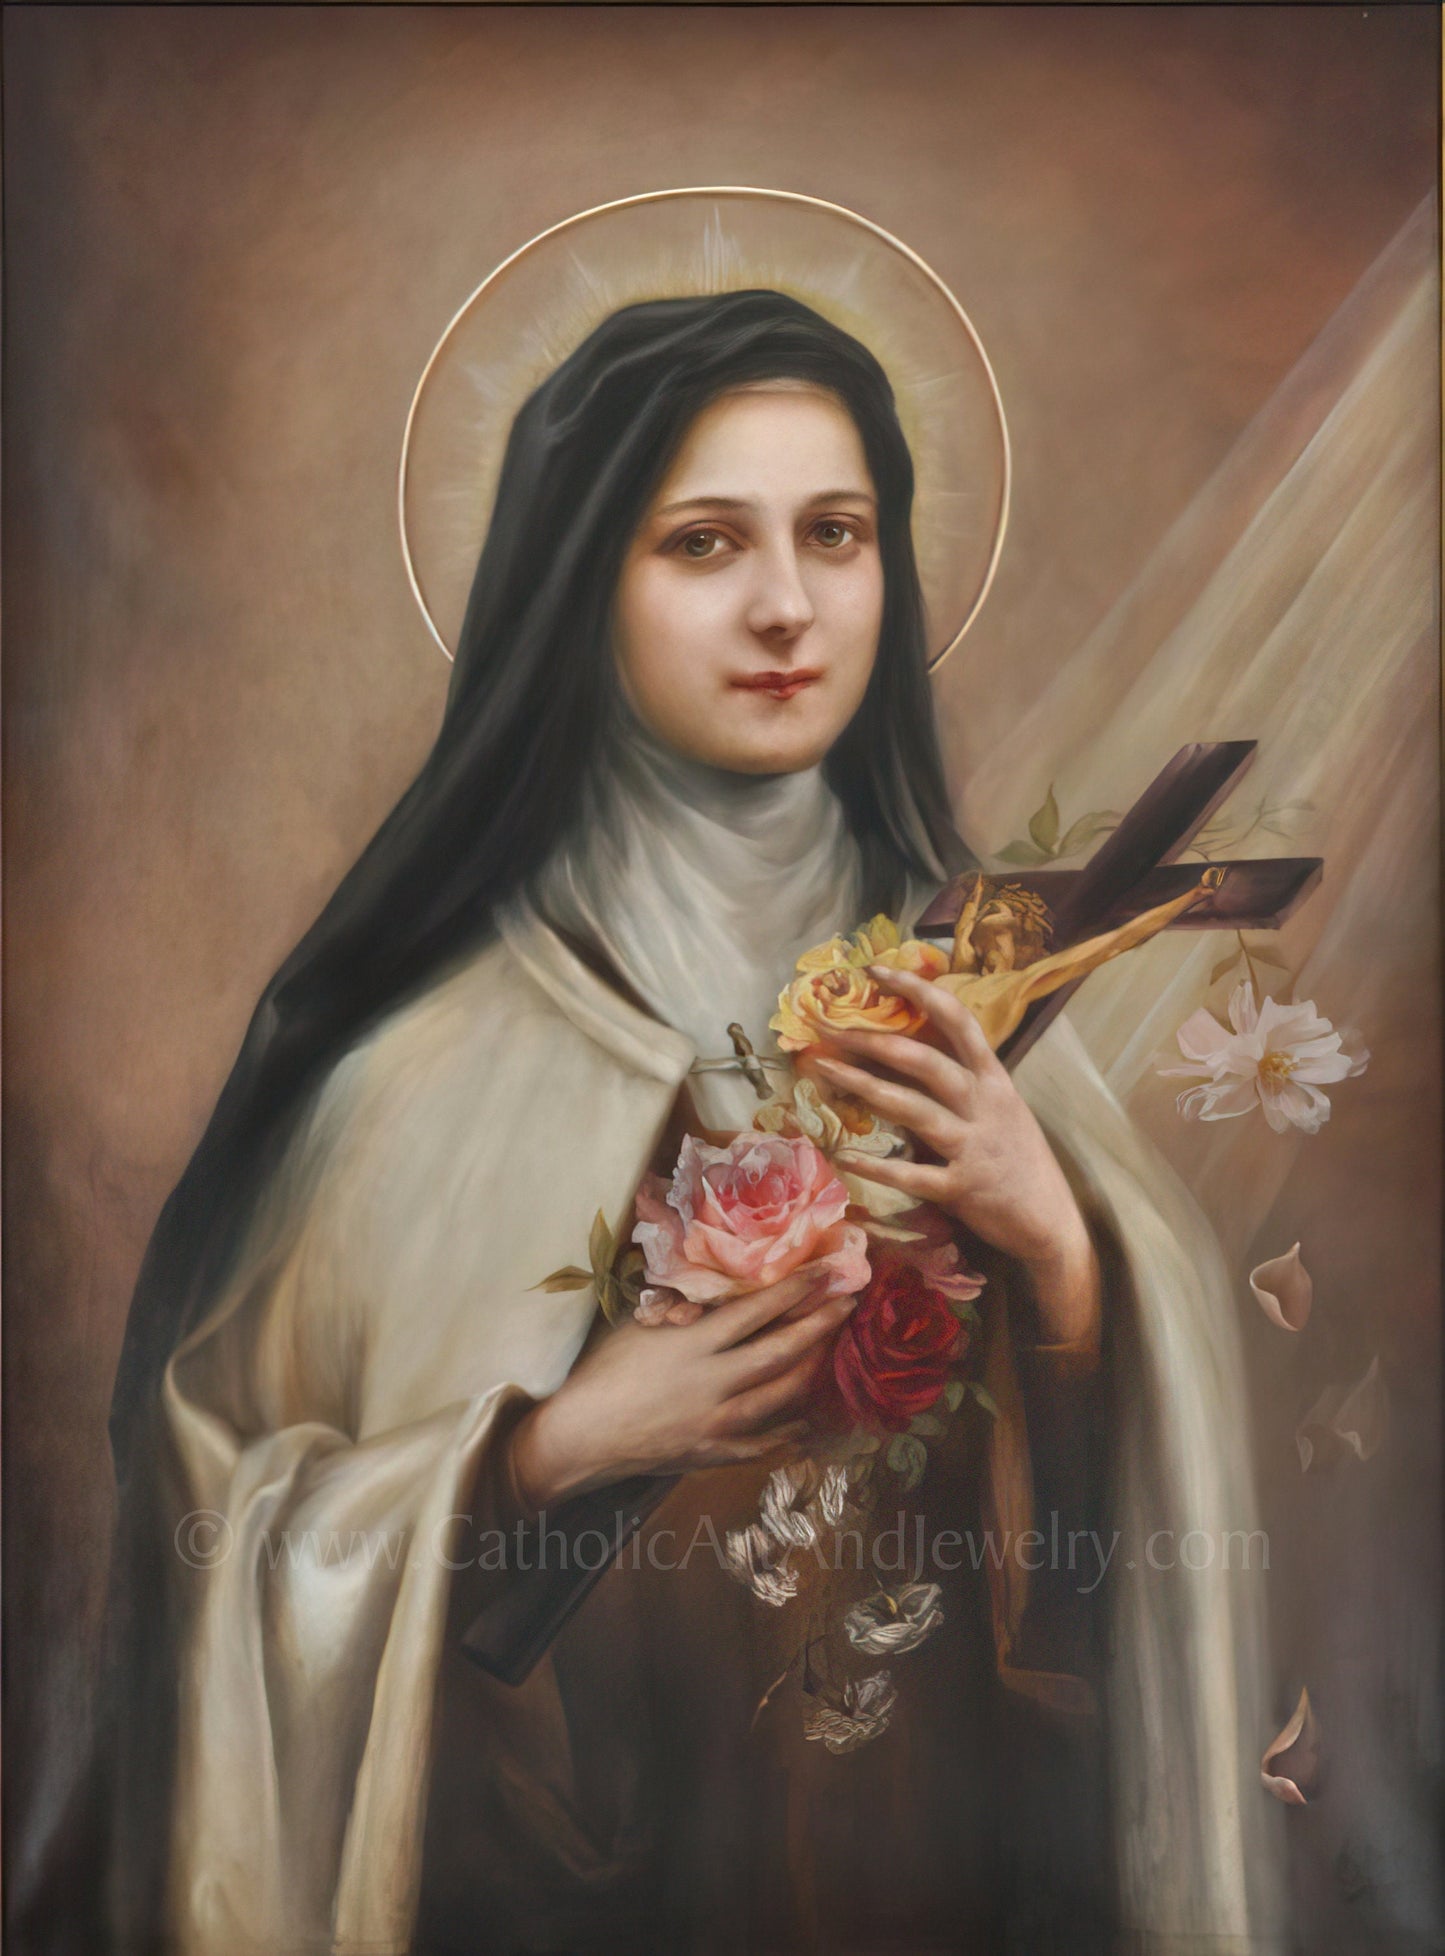 St Therese of Lisieux by Her Sister, Celine Martin – 3 sizes – Catholic Art Print